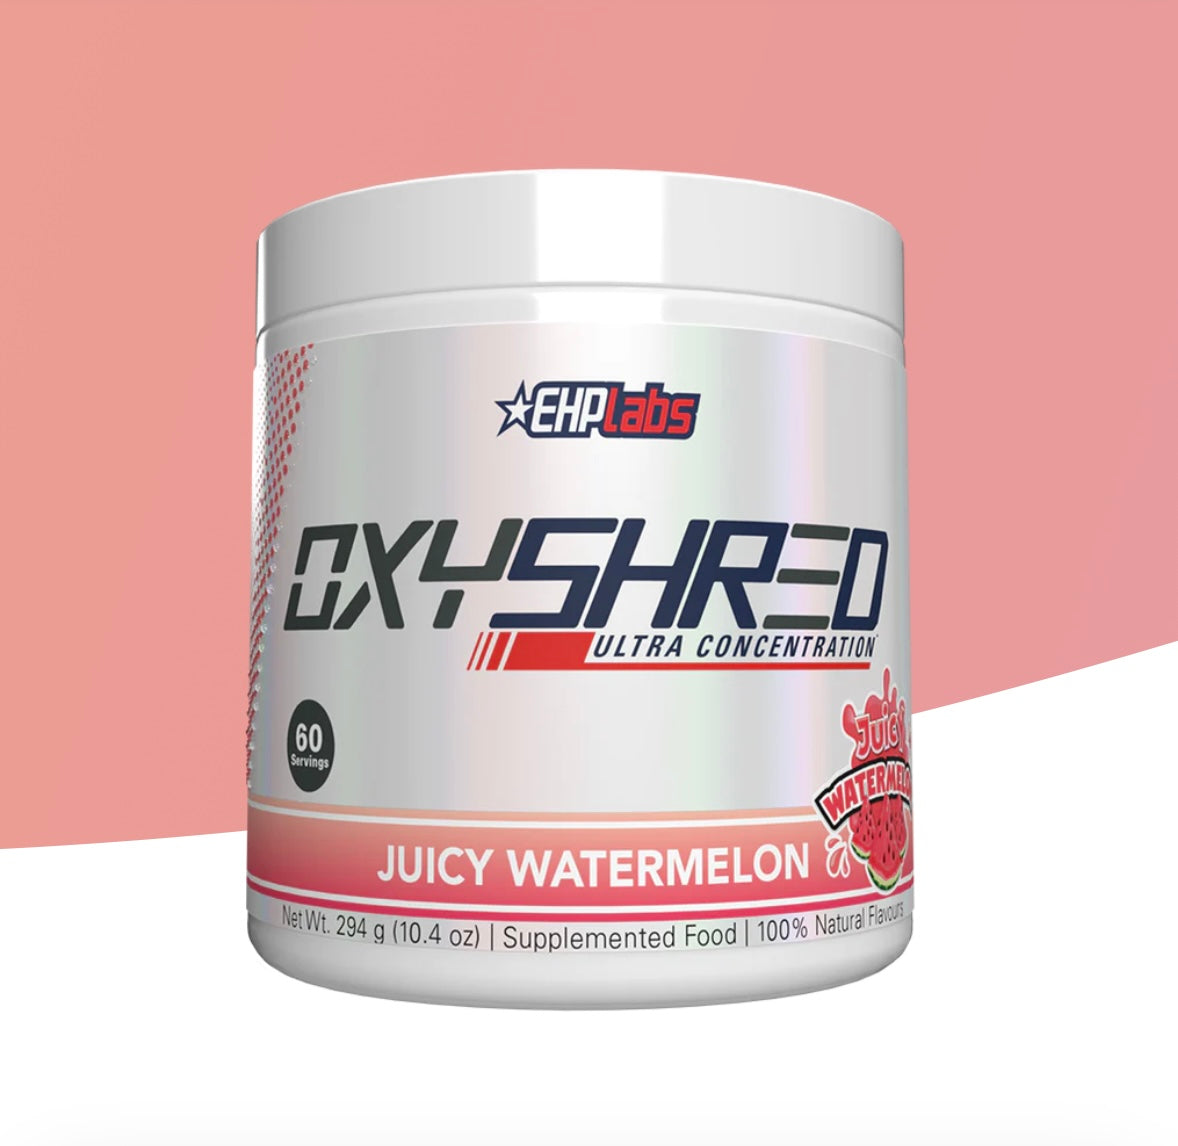 OxyShred Ultra Concentration - Juicy Watermelon